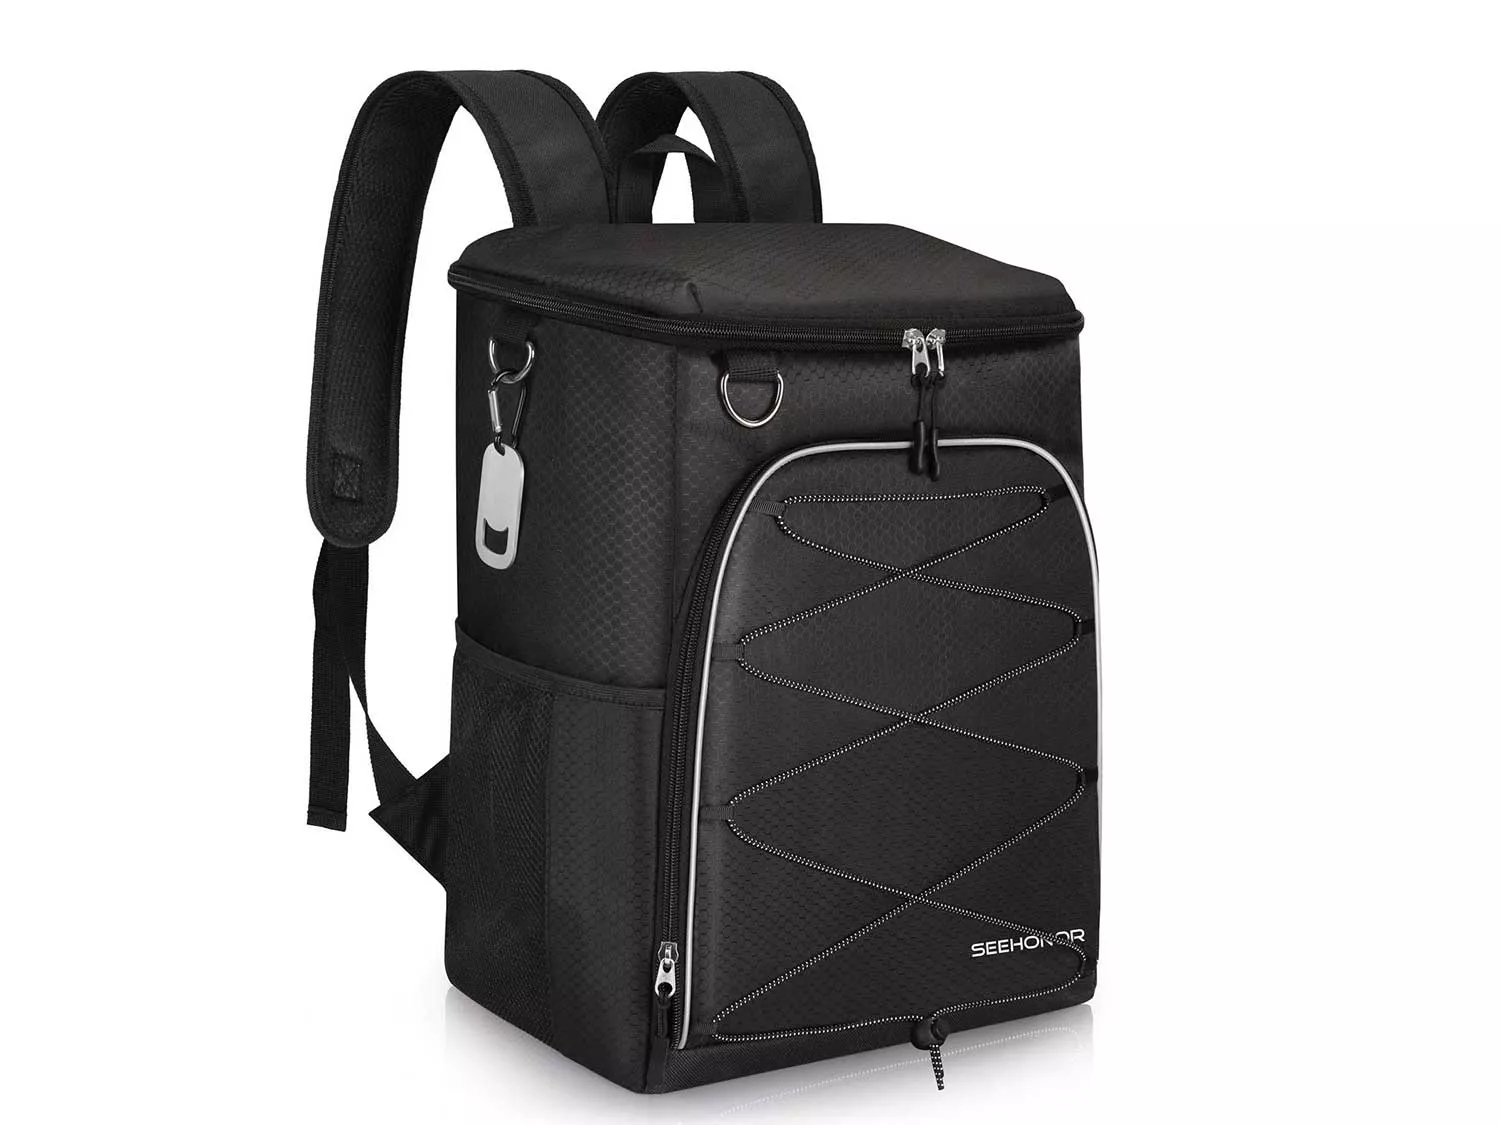 Seehonor Insulated Cooler Backpack